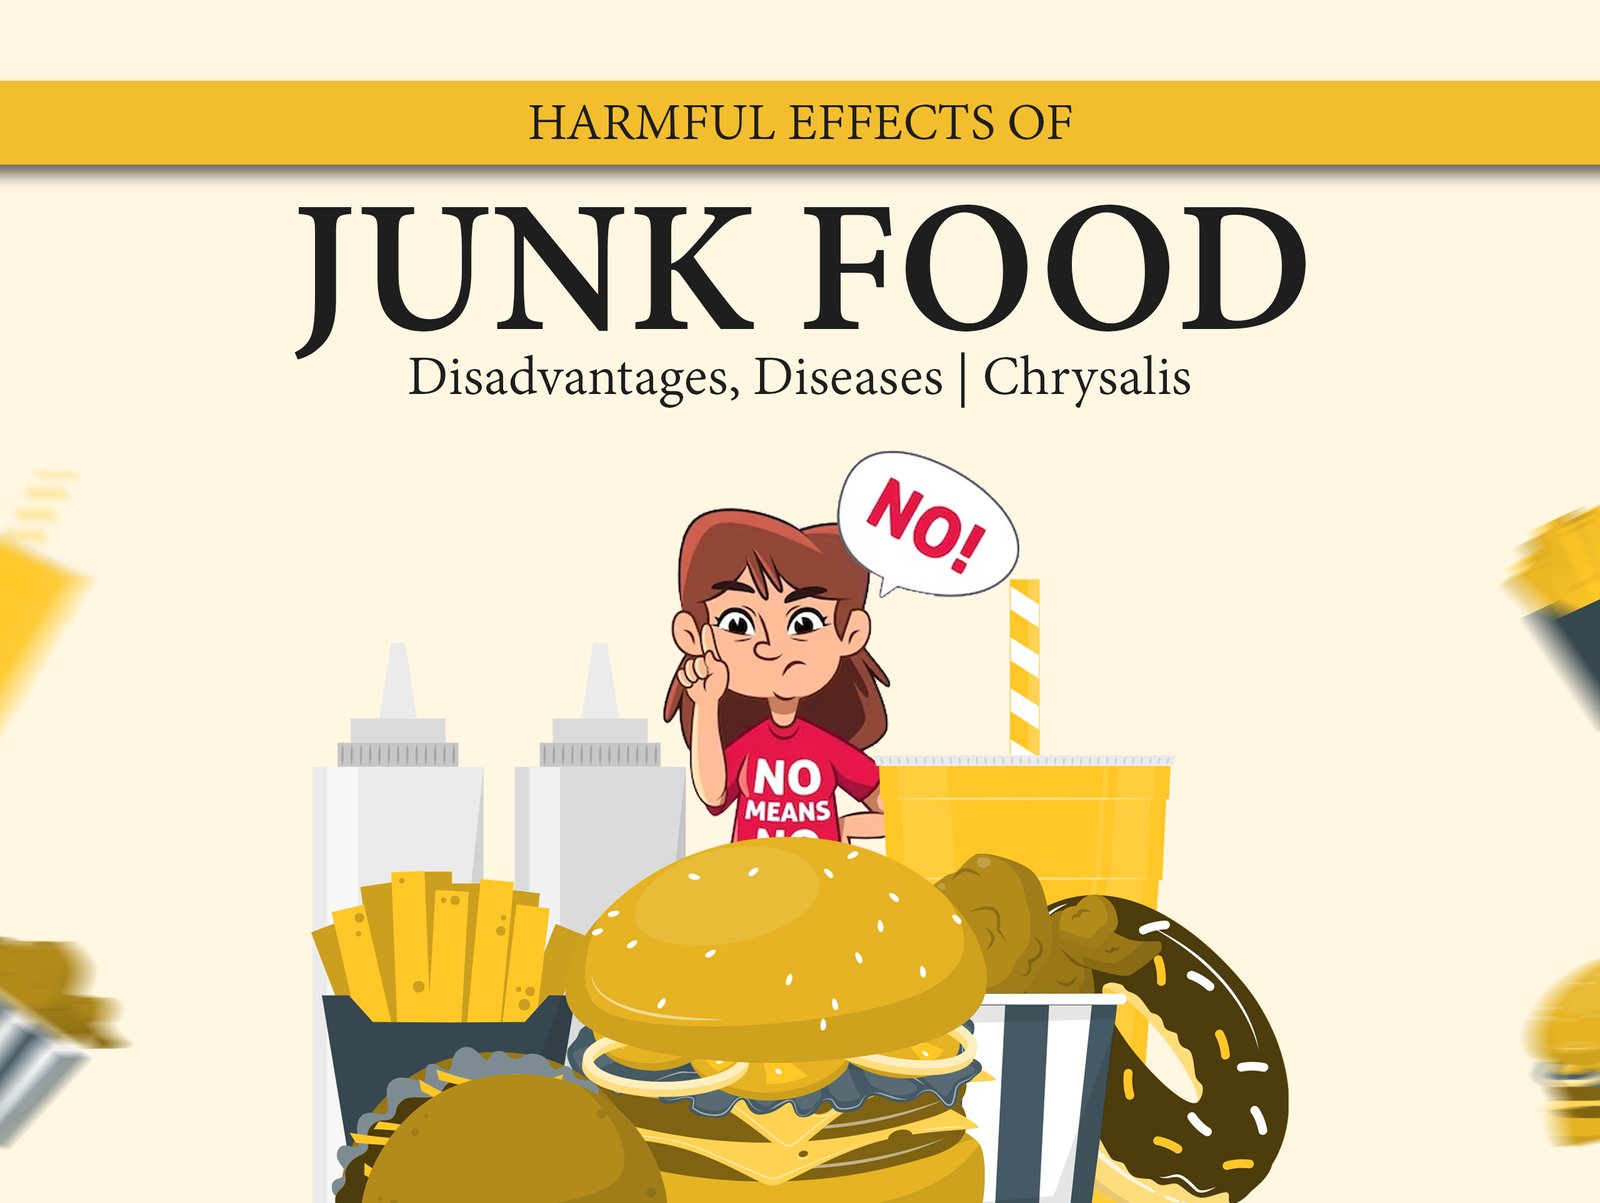 Harmful effects of Junk Food poster